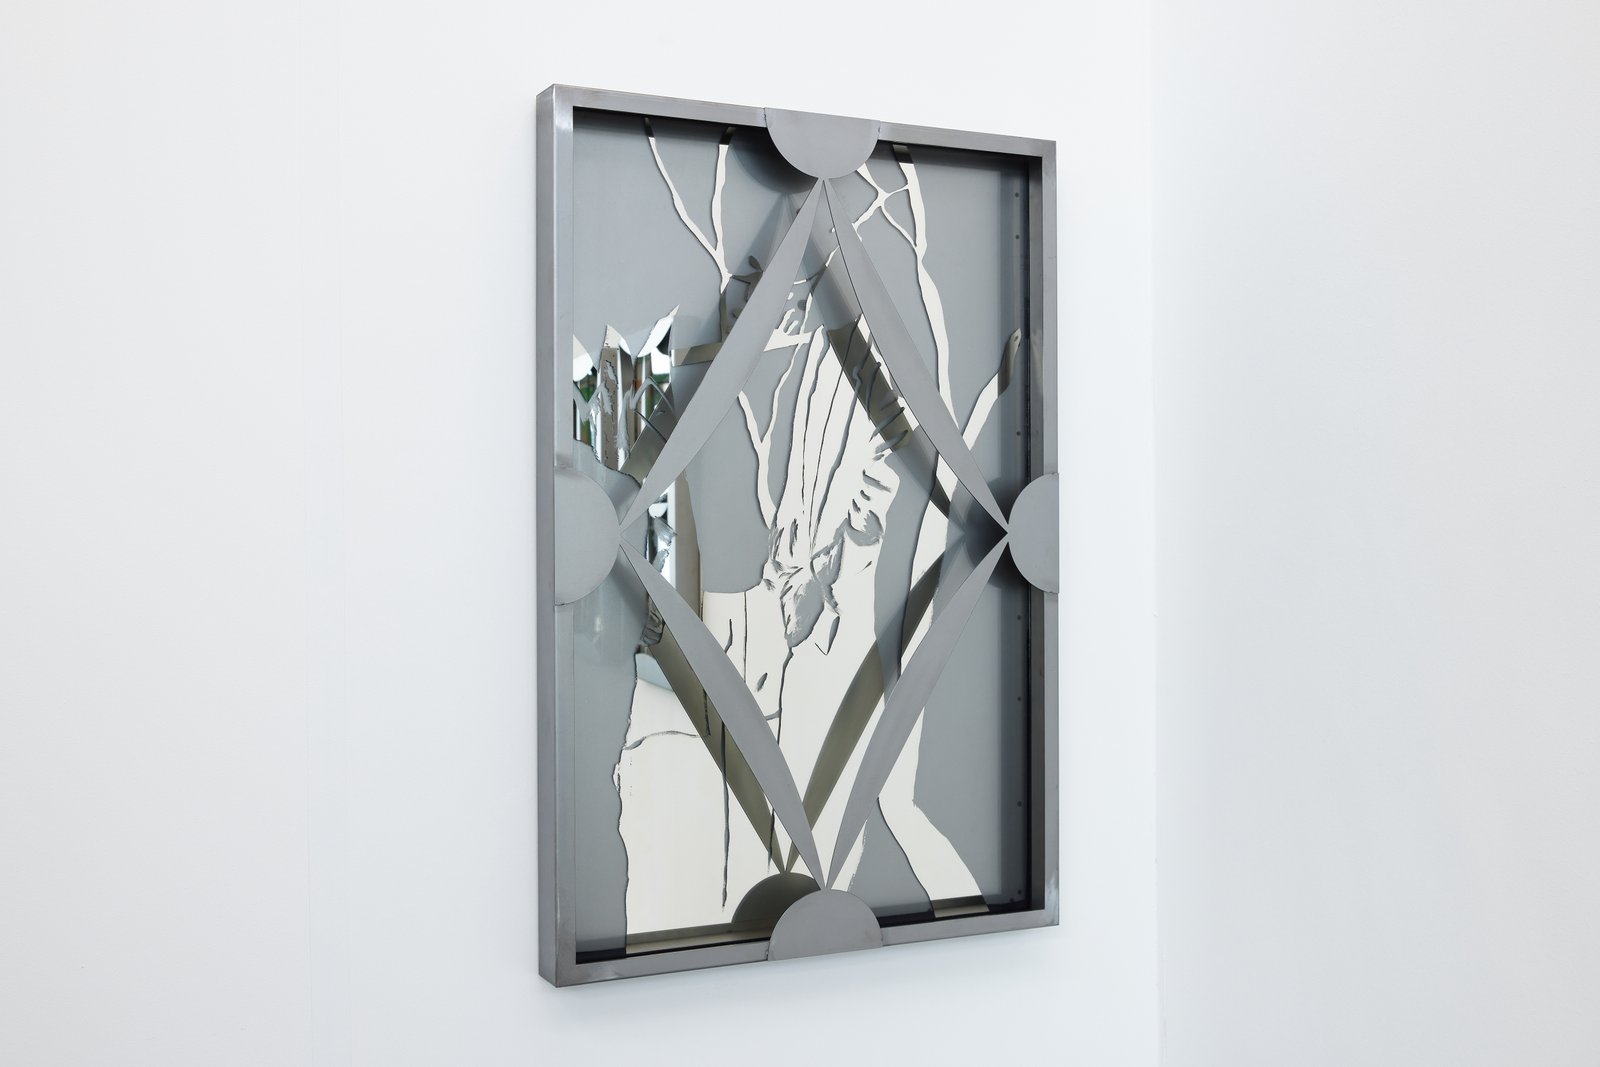 Jeunesse perdue, 2023, glass, silver nitrate and aluminum, 90 x 60 x 6 cm. Photographer: Moritz Schermbach. In courtesy of the artist & PHILIPPZOLLINGER.